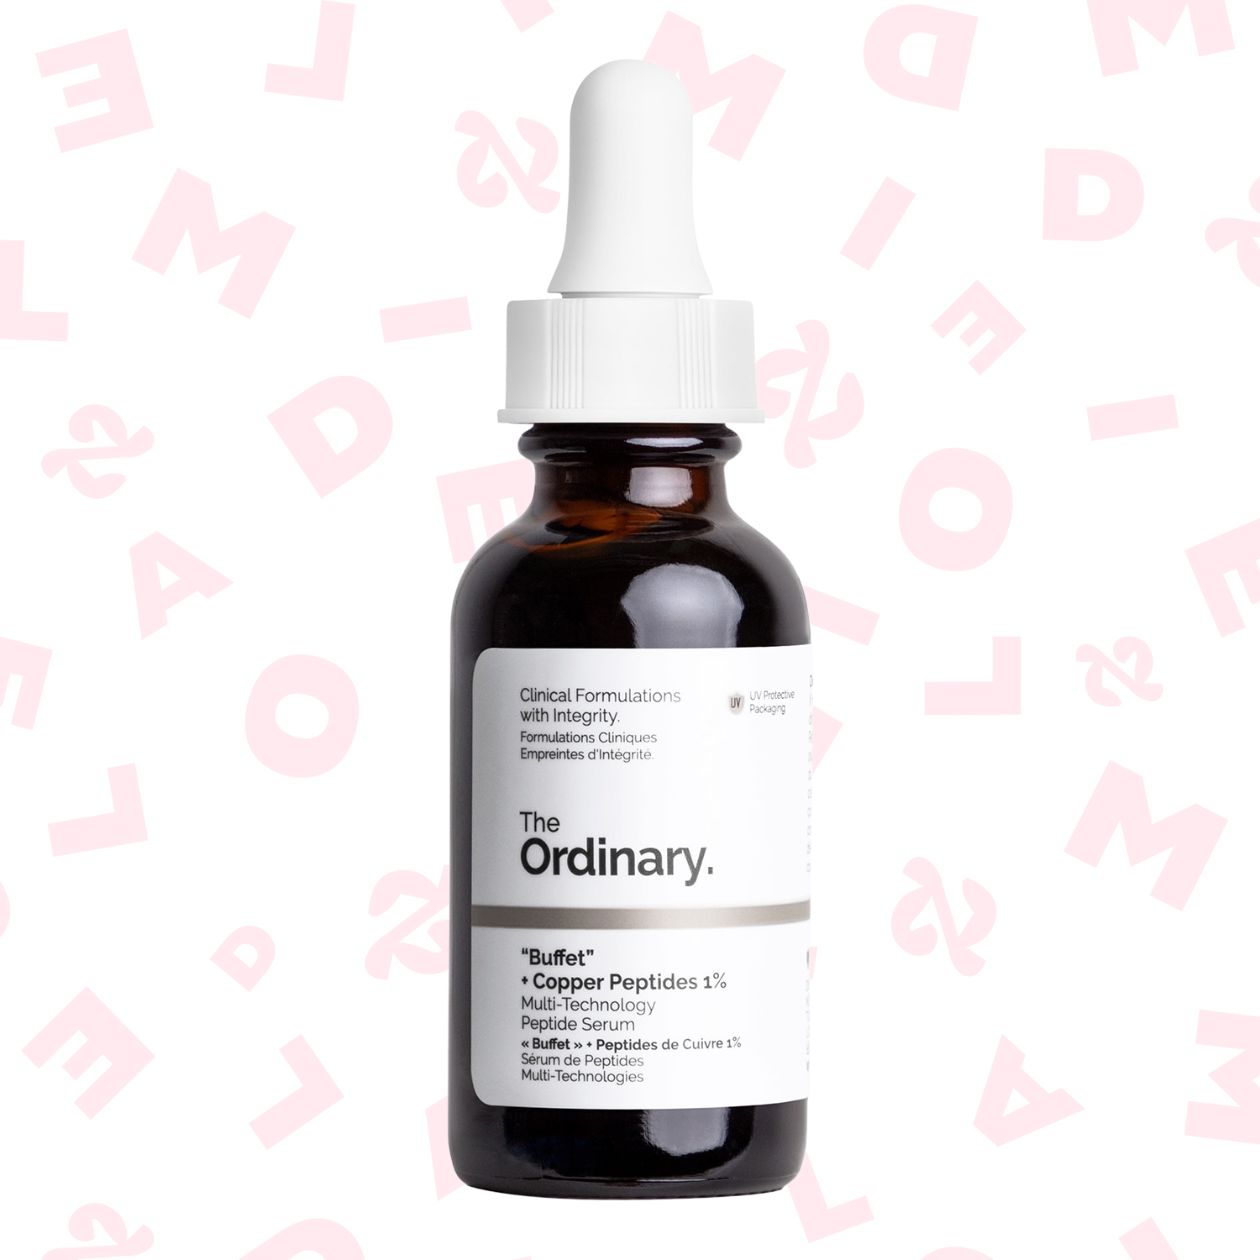 the-ordinary-serum-buffet-peptides-cuivre